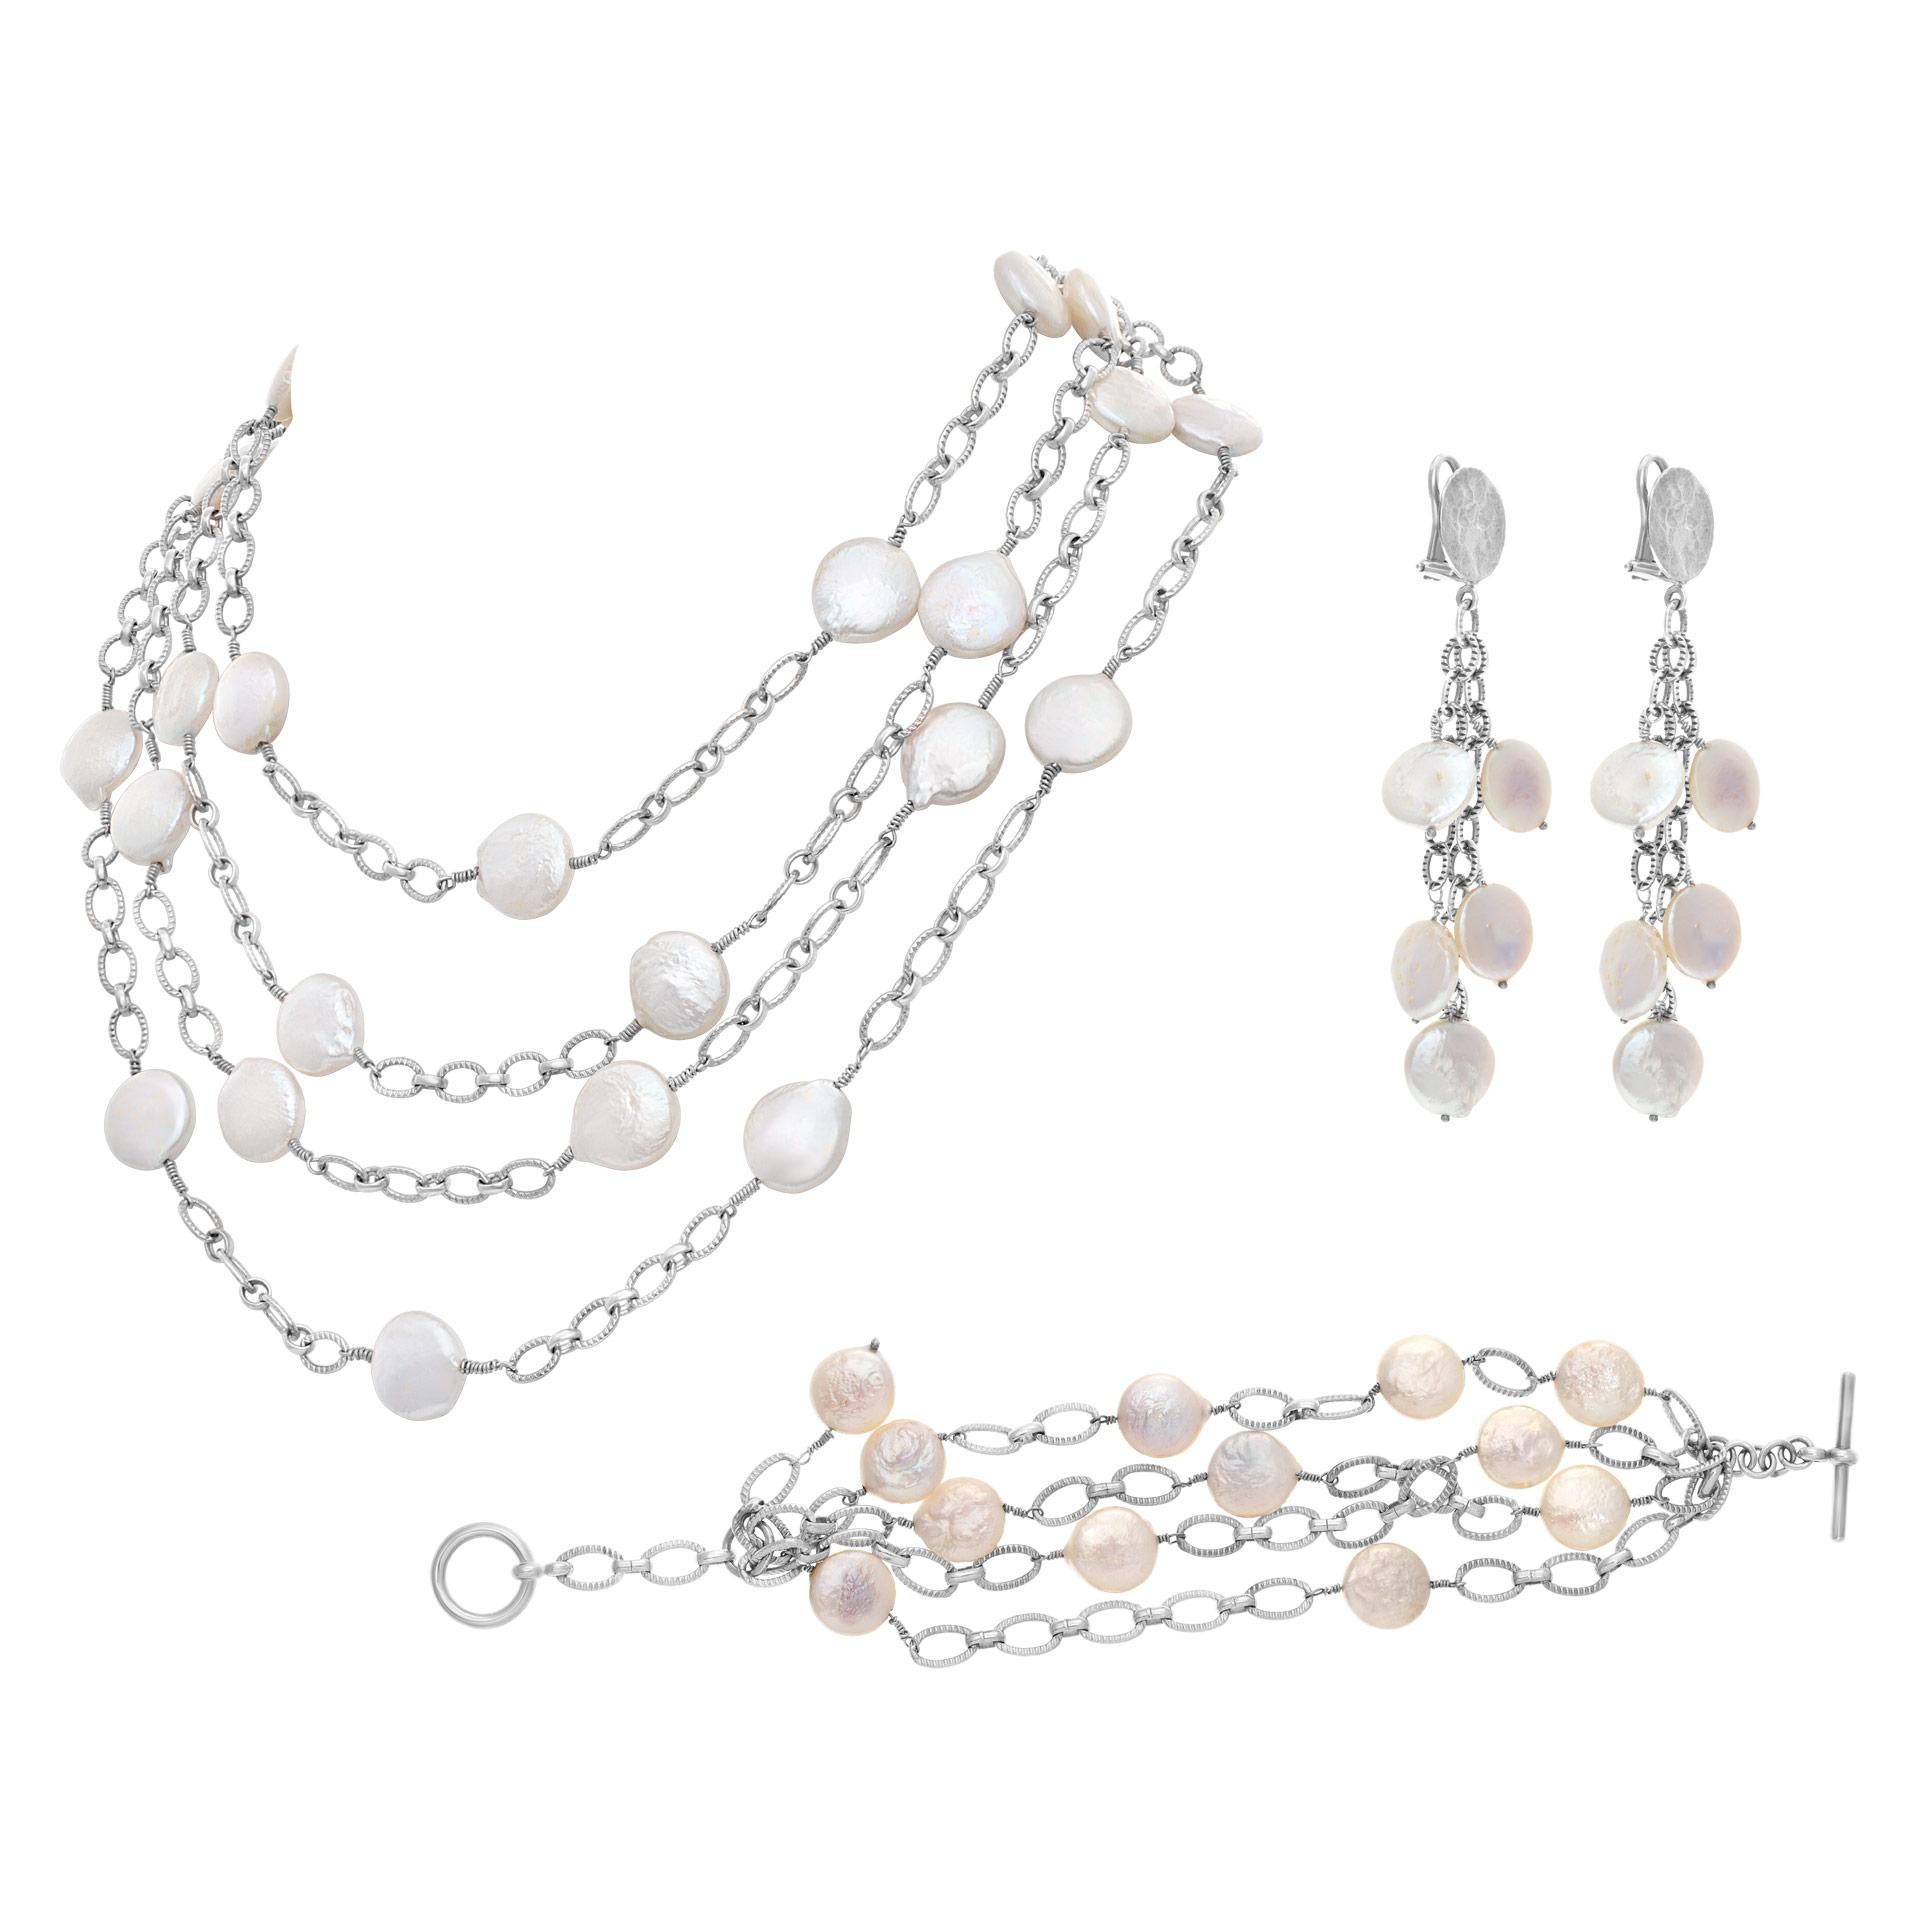 Set in 14k white gold with Mother of Pearl dots. Set includes: earrings, bracelet and necklace. Necklace is 18